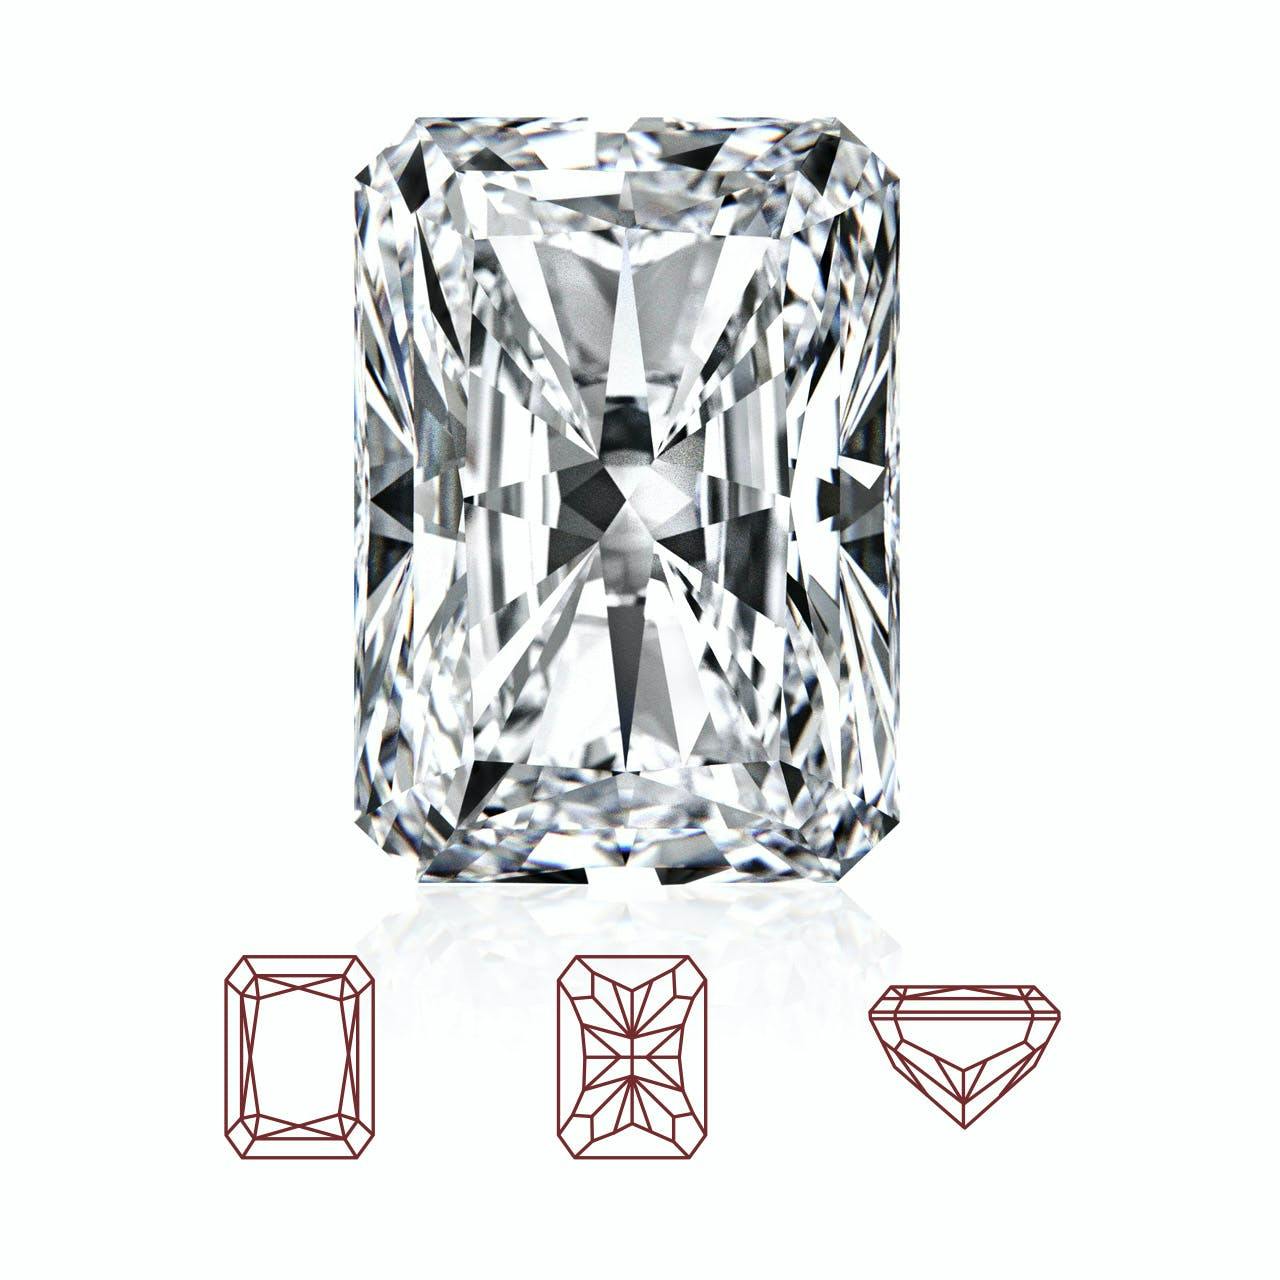 Radiant cut among different types of diamond cut from different angles